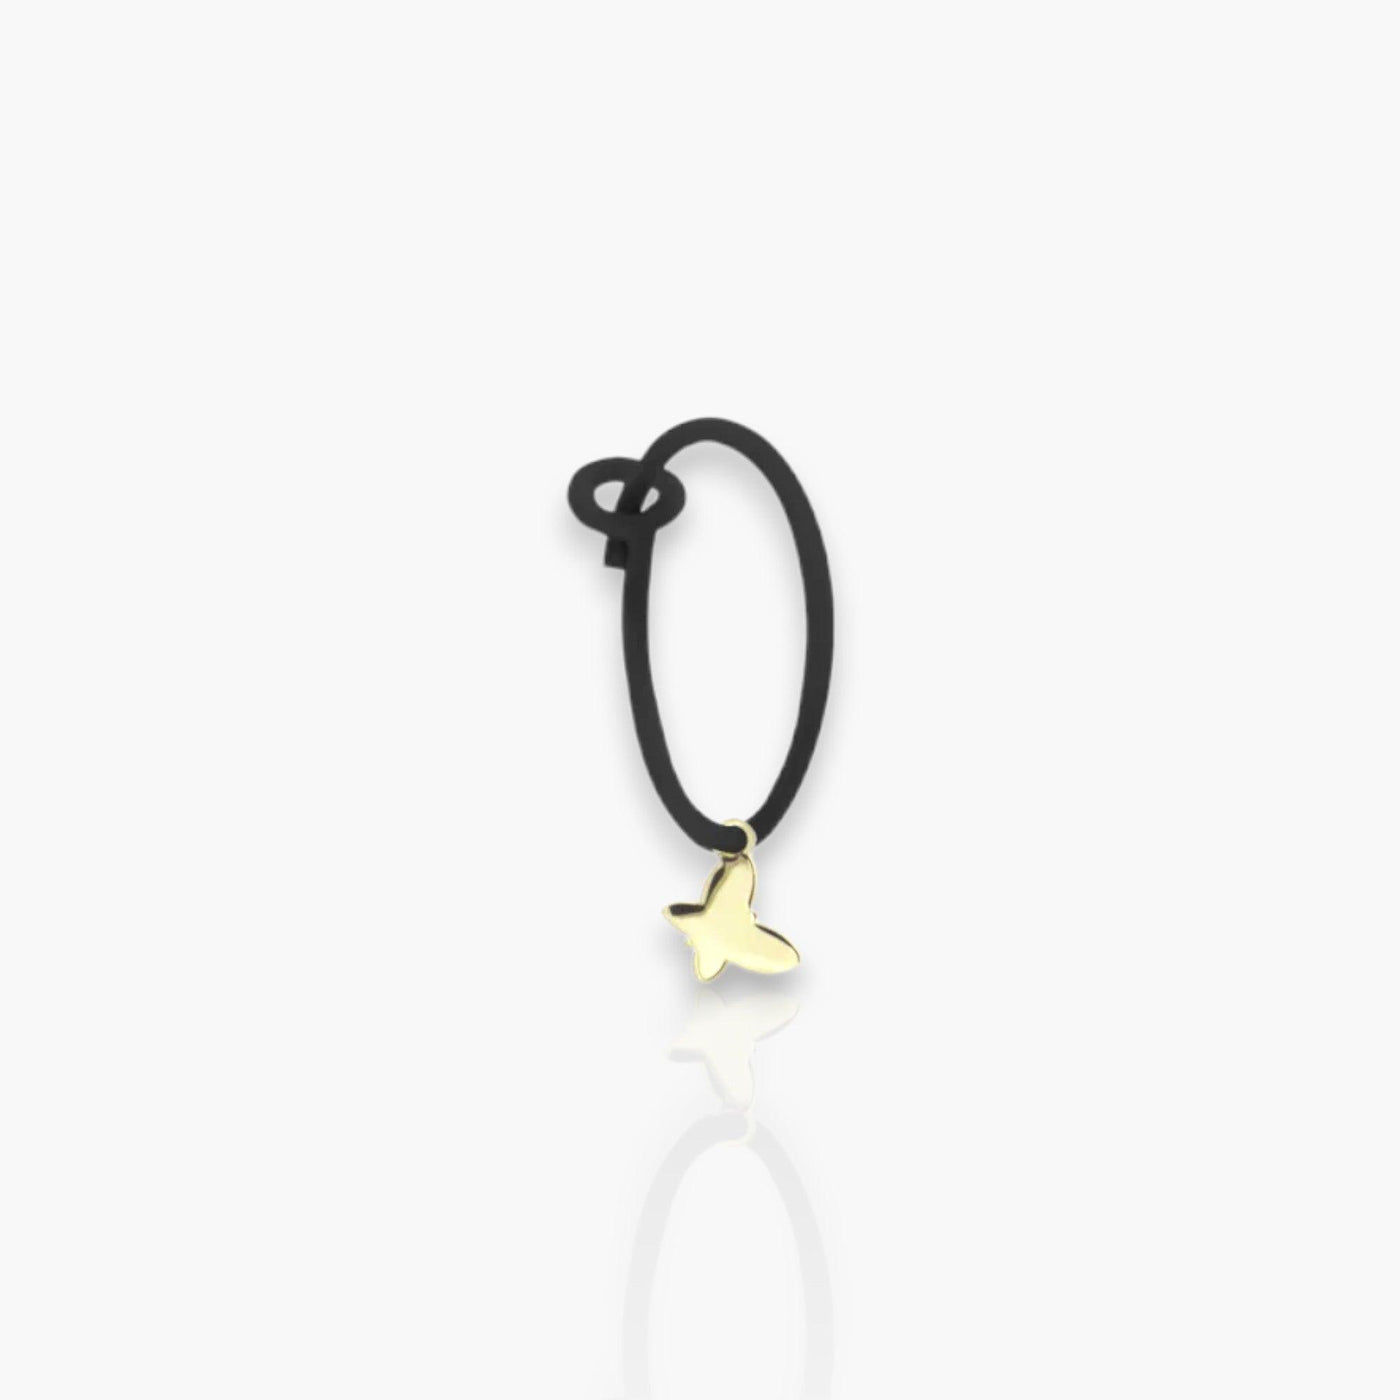 Mono Earring with 18kt gold butterfly and painted silver hoop - Moregola Fine Jewelry